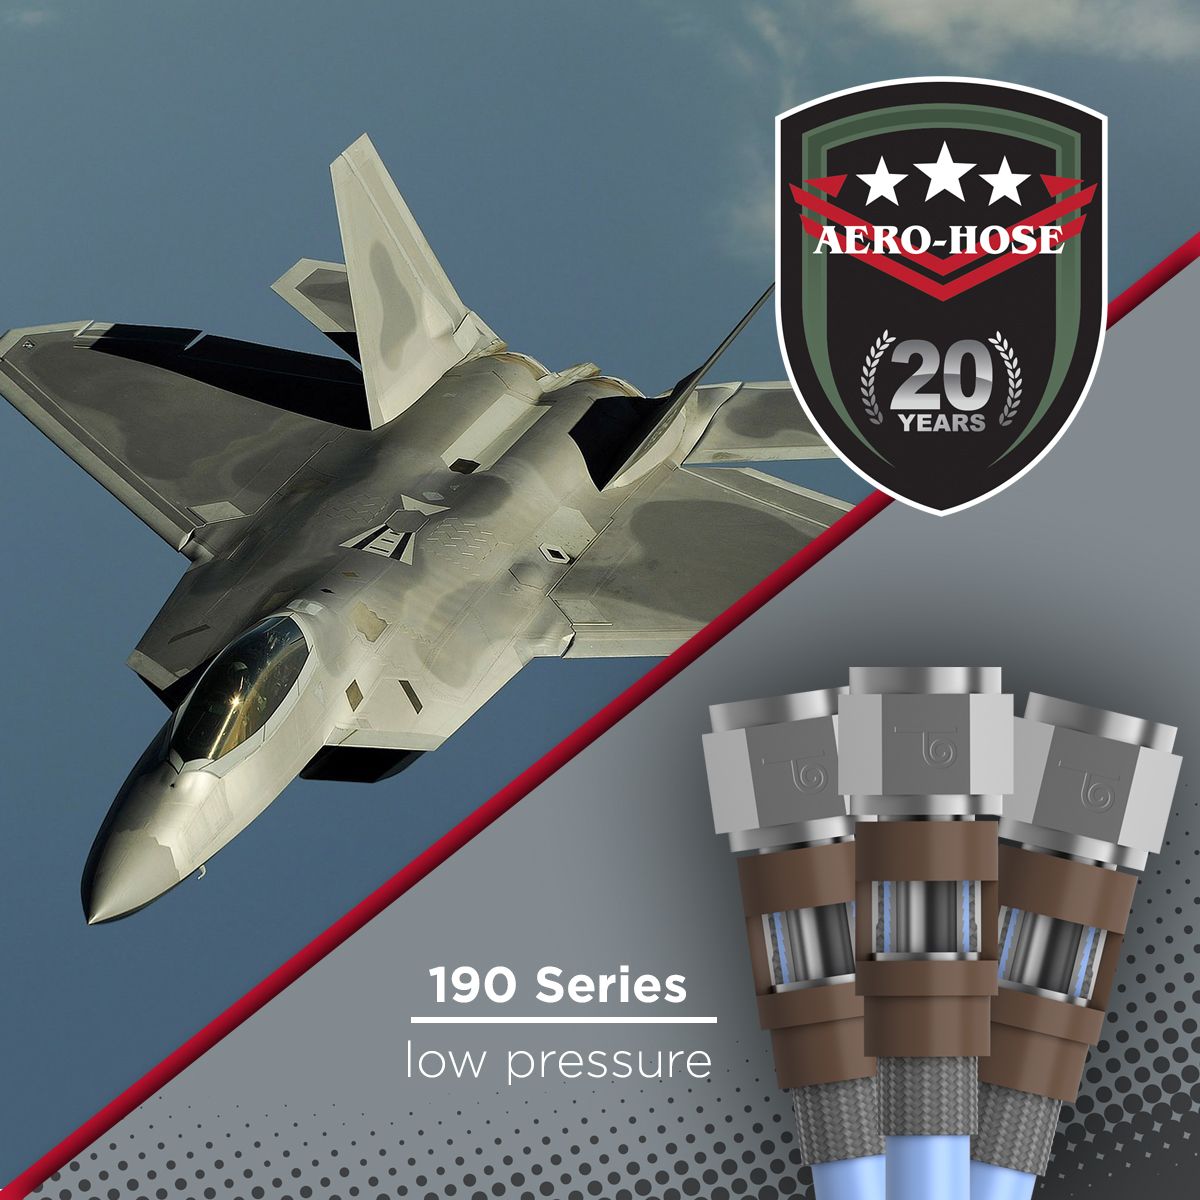 a fighter jet is displayed alongside the logo of aero-hose and three low-pressure hoses from their 190 series. text reads "20 years" and "auto draft 190 series low pressure.